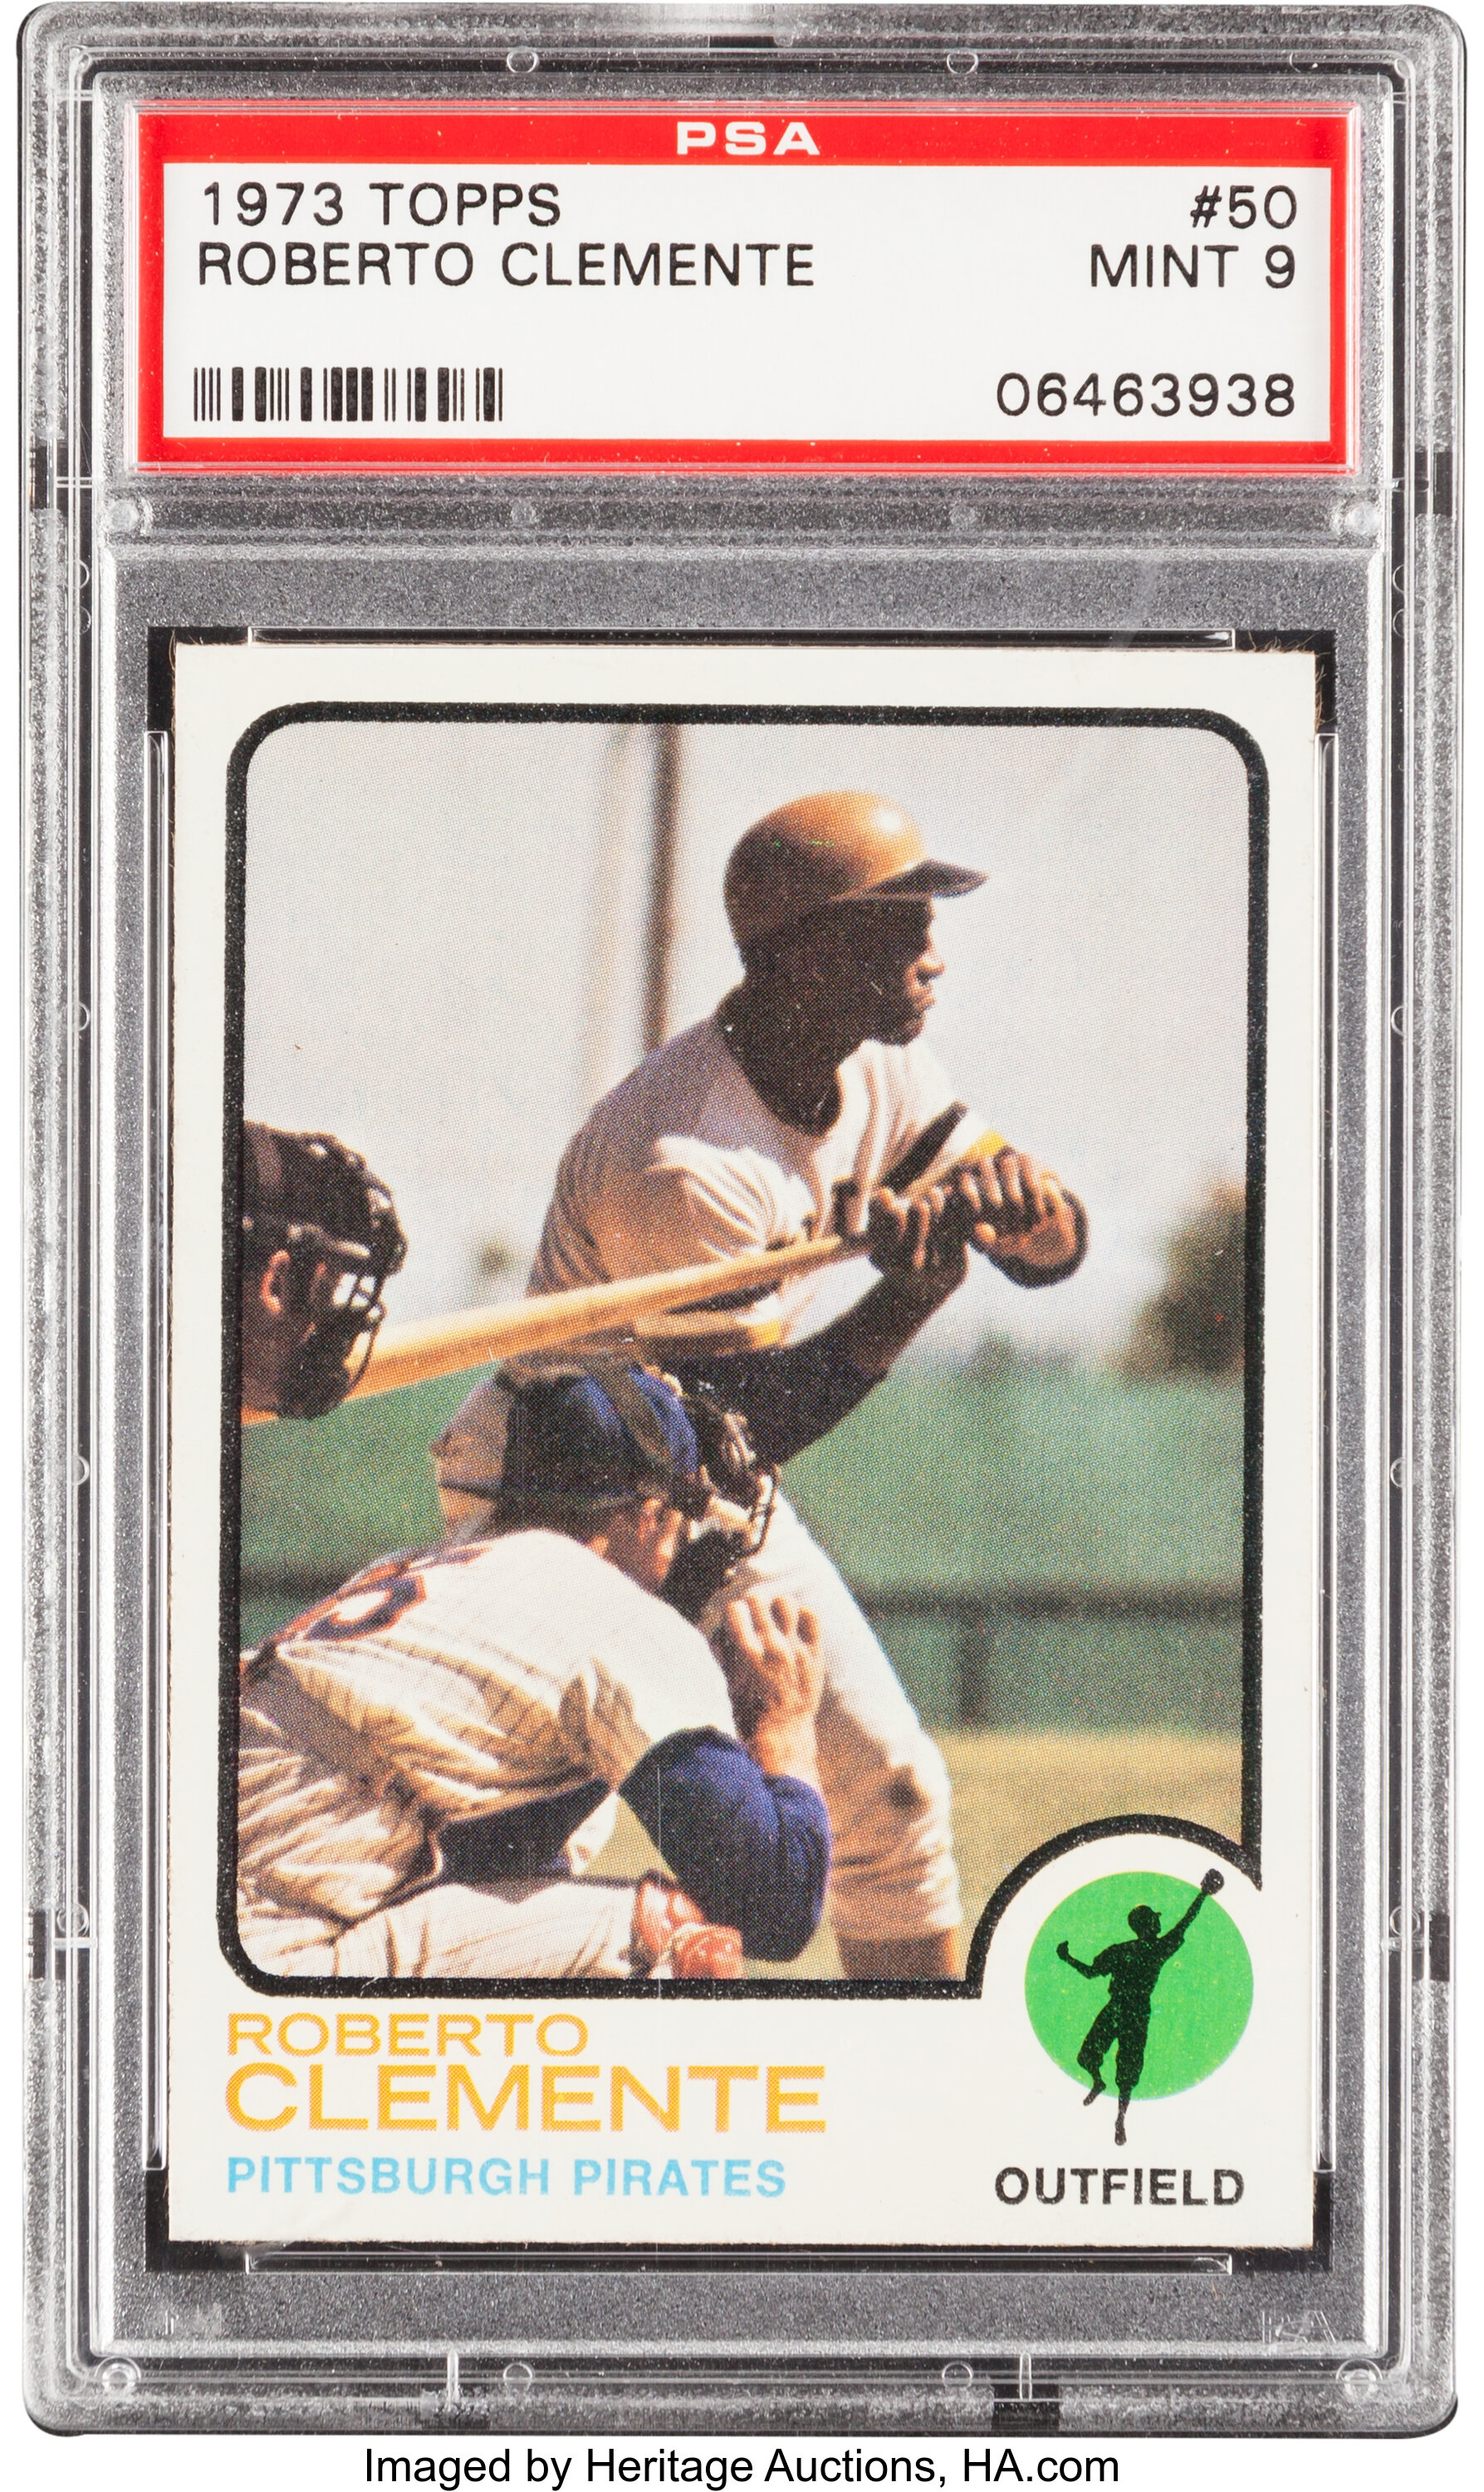 Card of the Day: 1973 Topps Roberto Clemente – PBN History